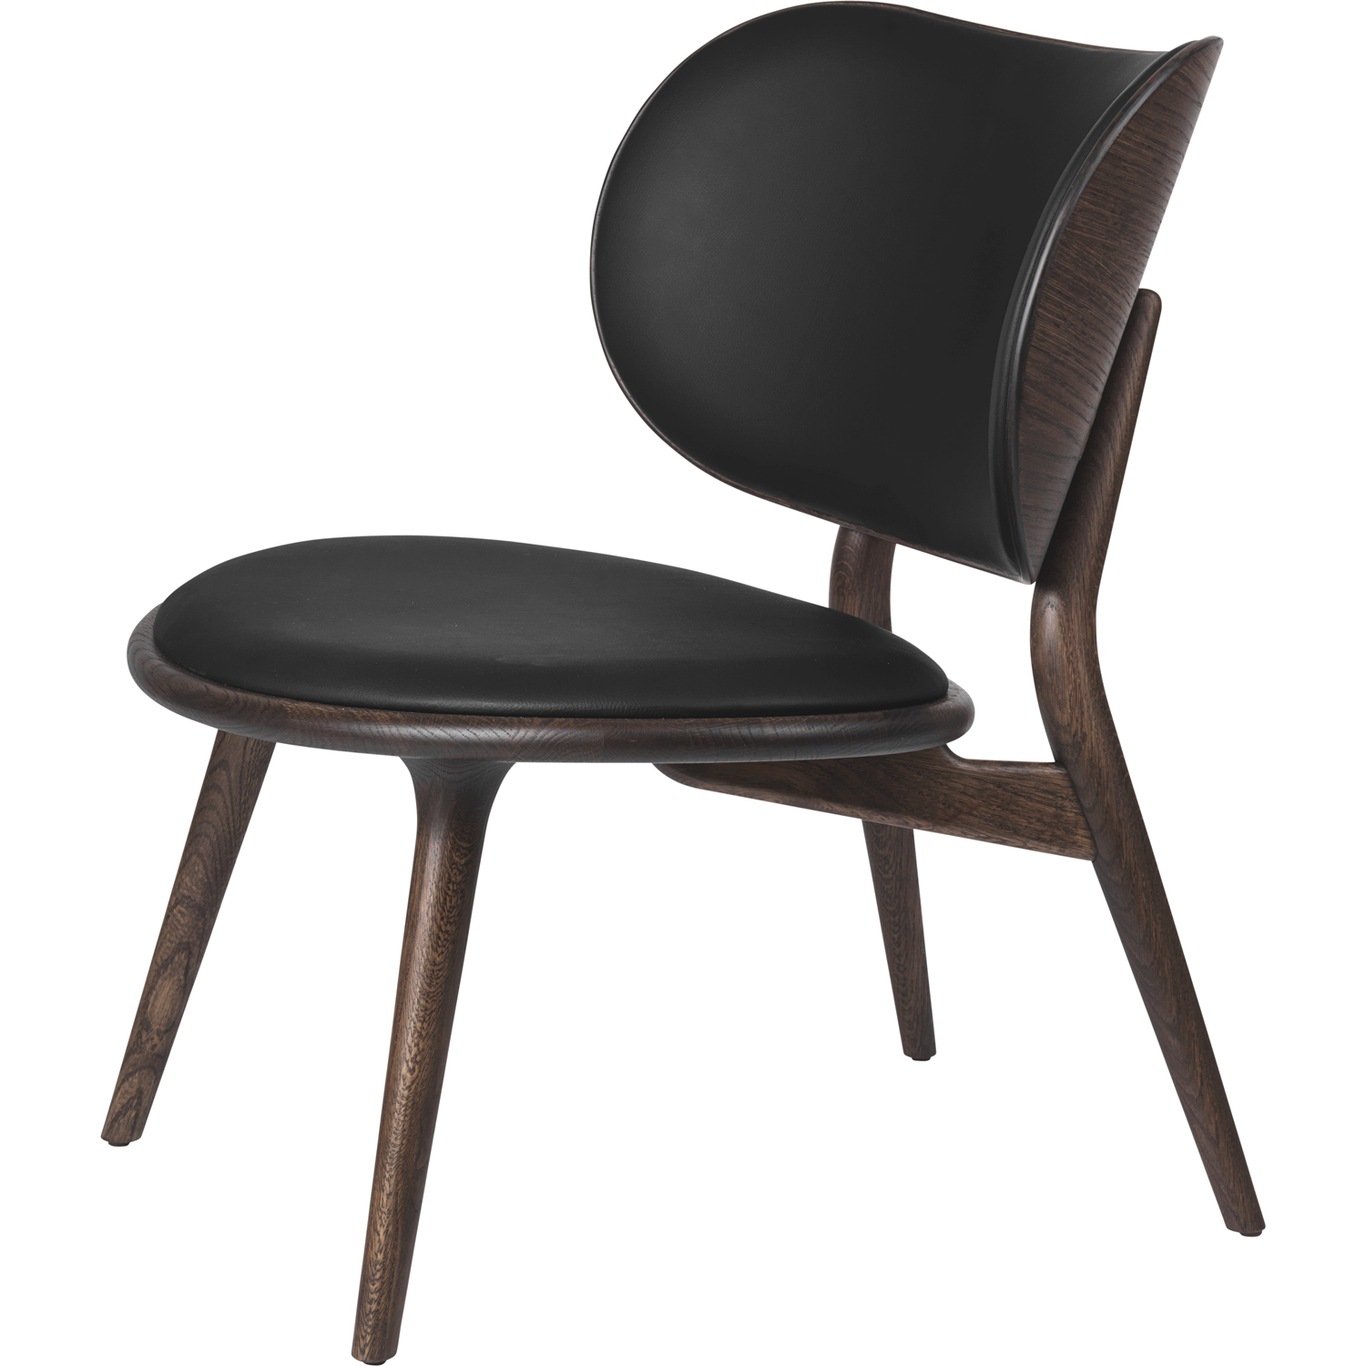 The Lounge Chair, Sirka Dark Stained Oak